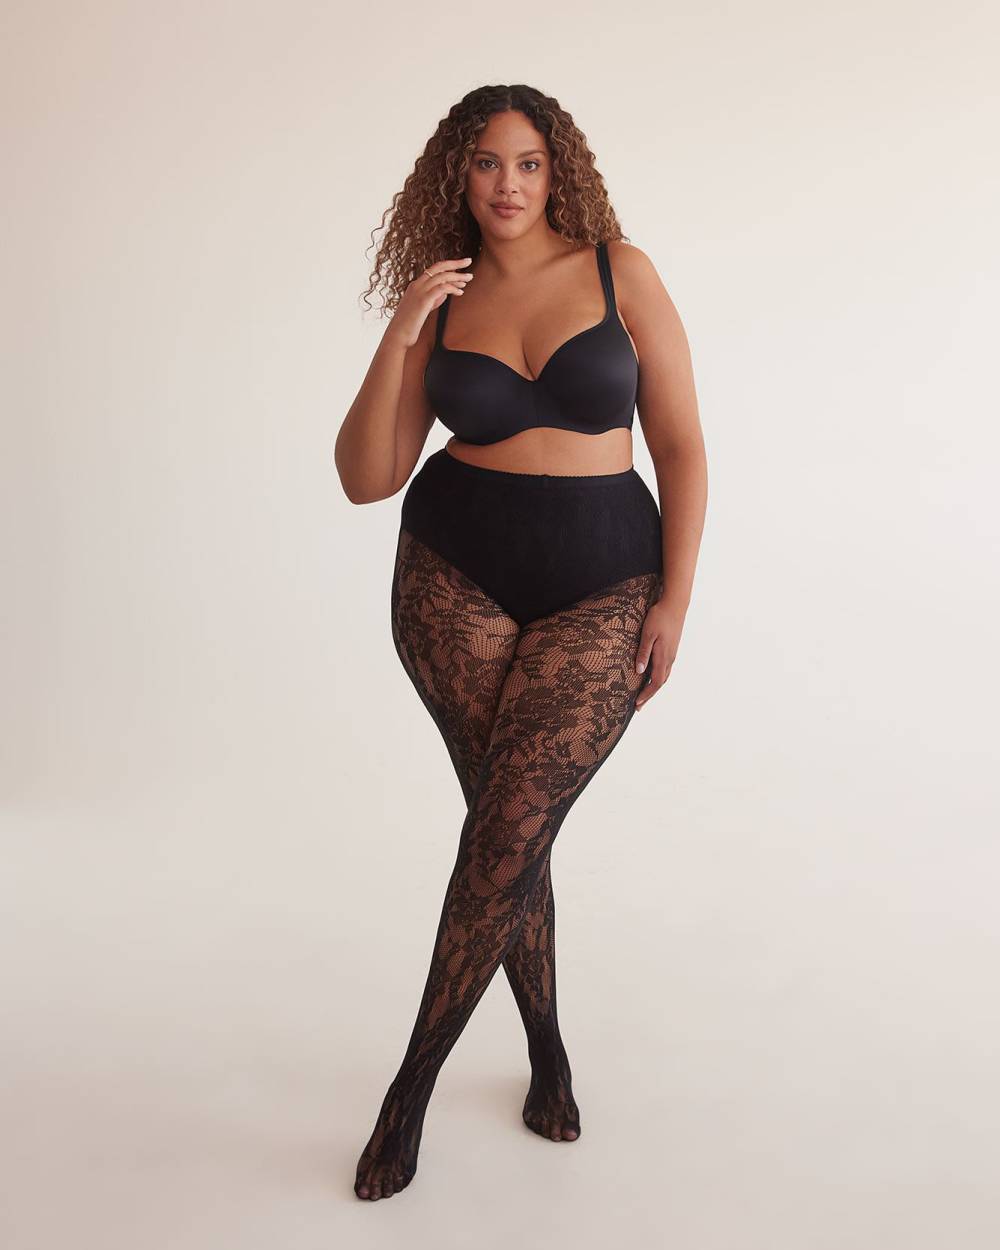 LEG-35 {The Thing Is} Black Floral Leggings EXTENDED PLUS SIZE 3X/5X –  Curvy Boutique Plus Size Clothing